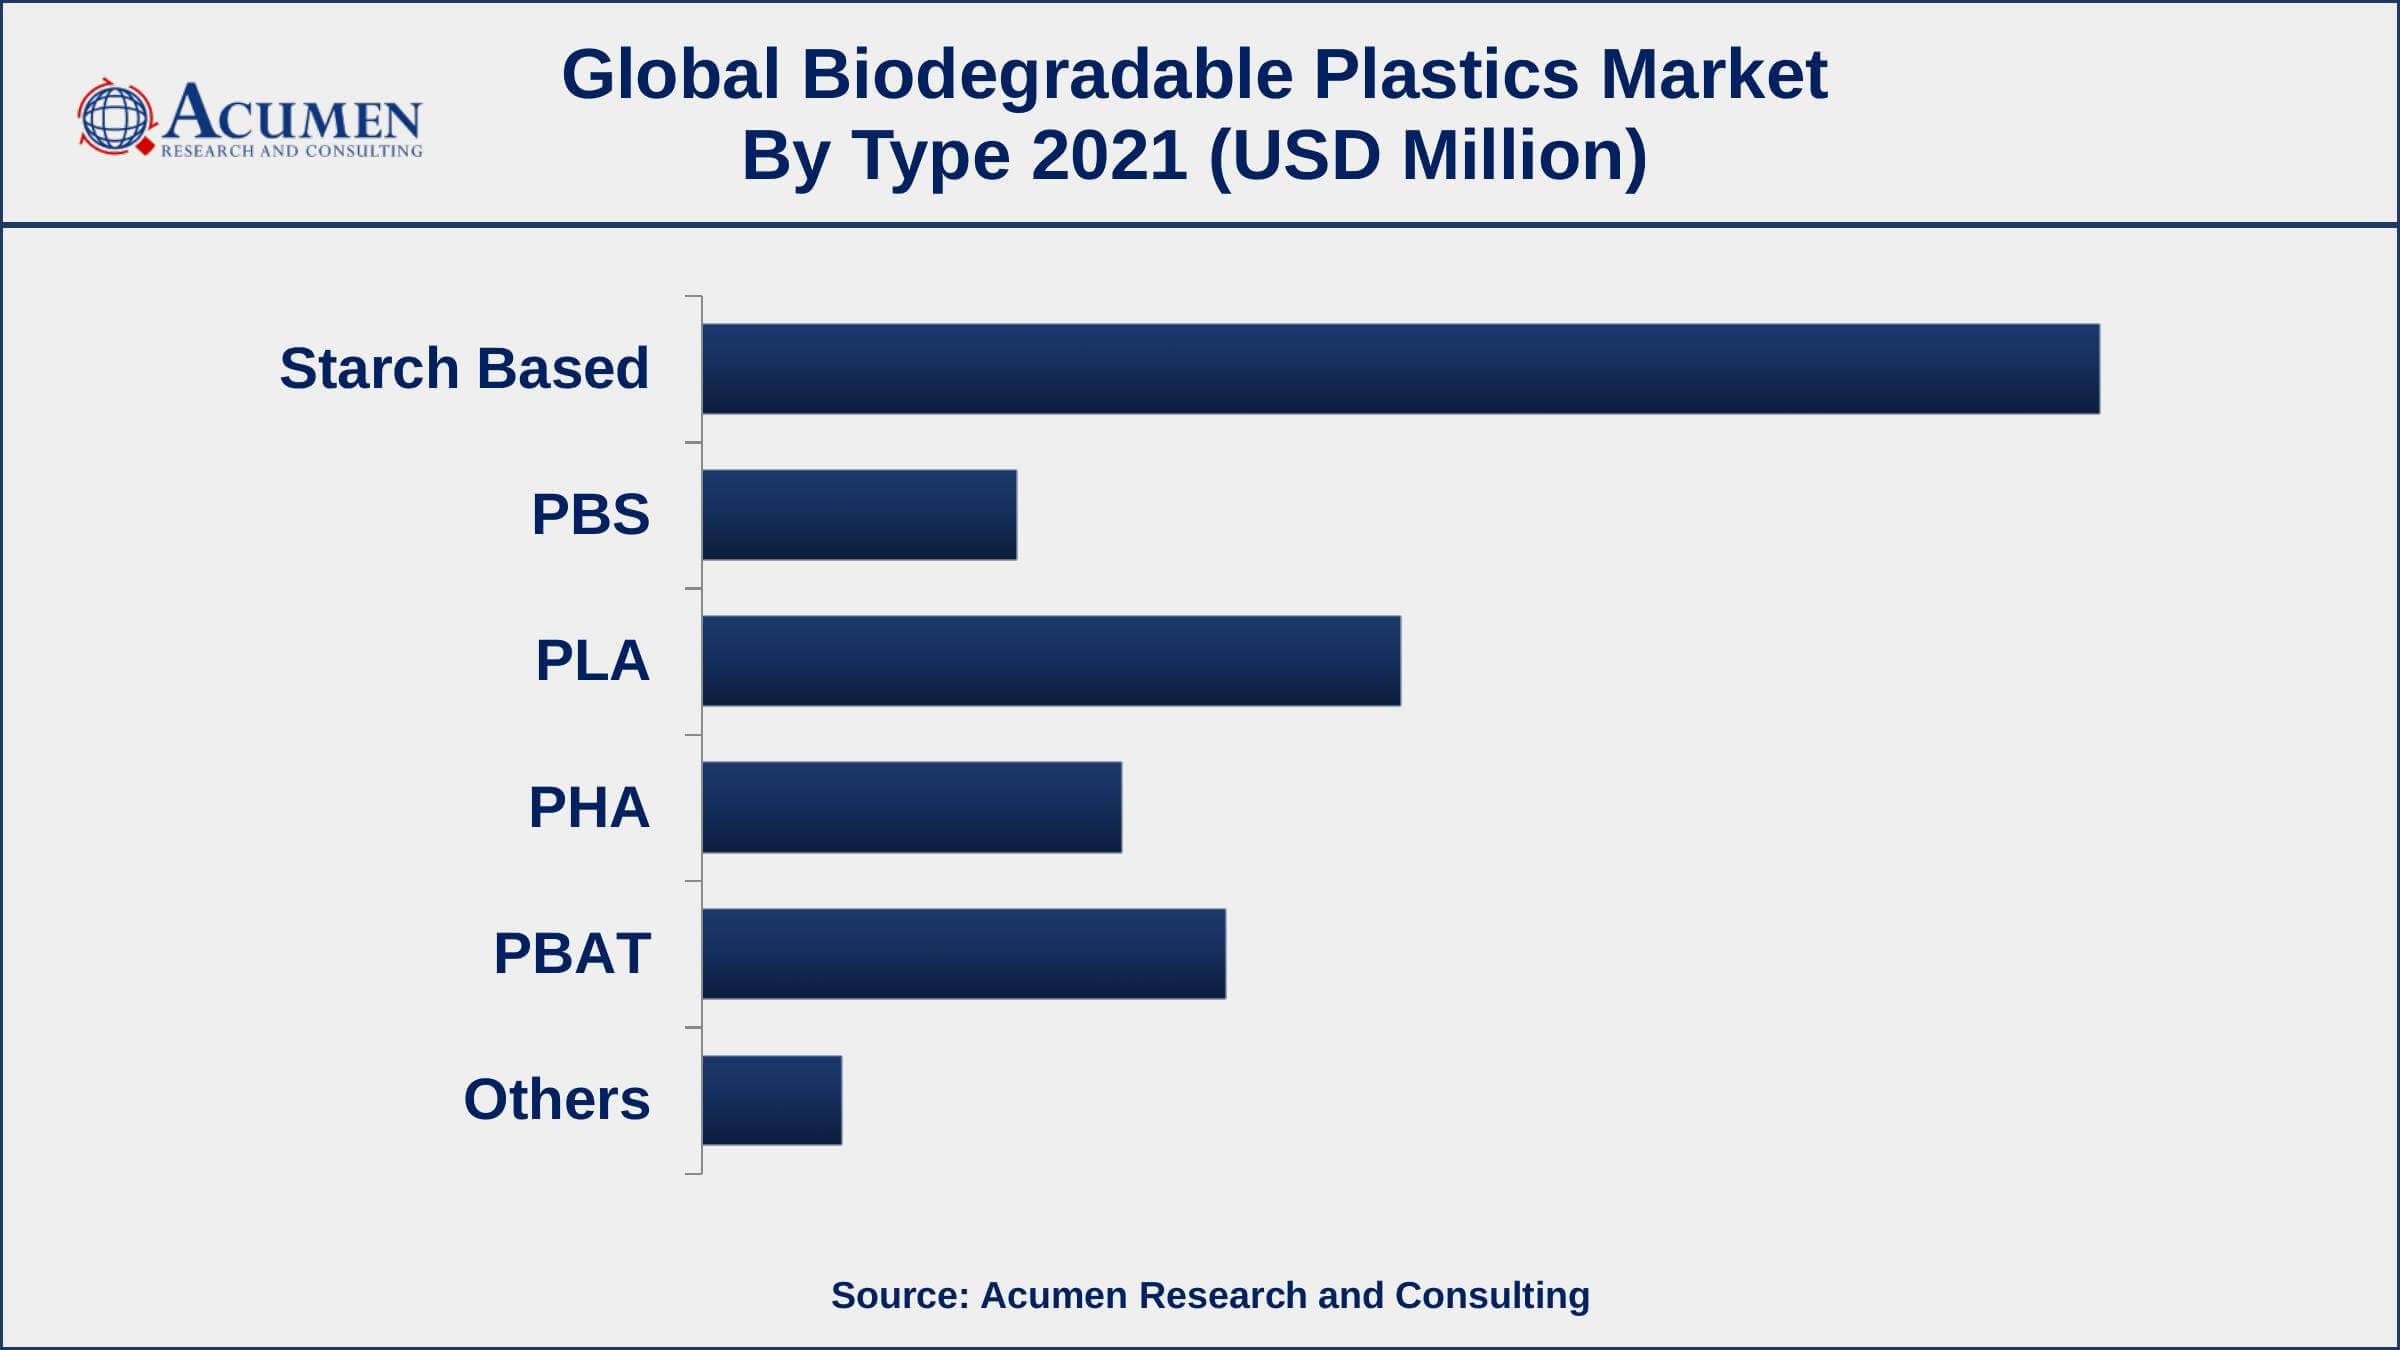 Based on type, starch-based segment accounted for over 41.4% of the overall market share in 2021